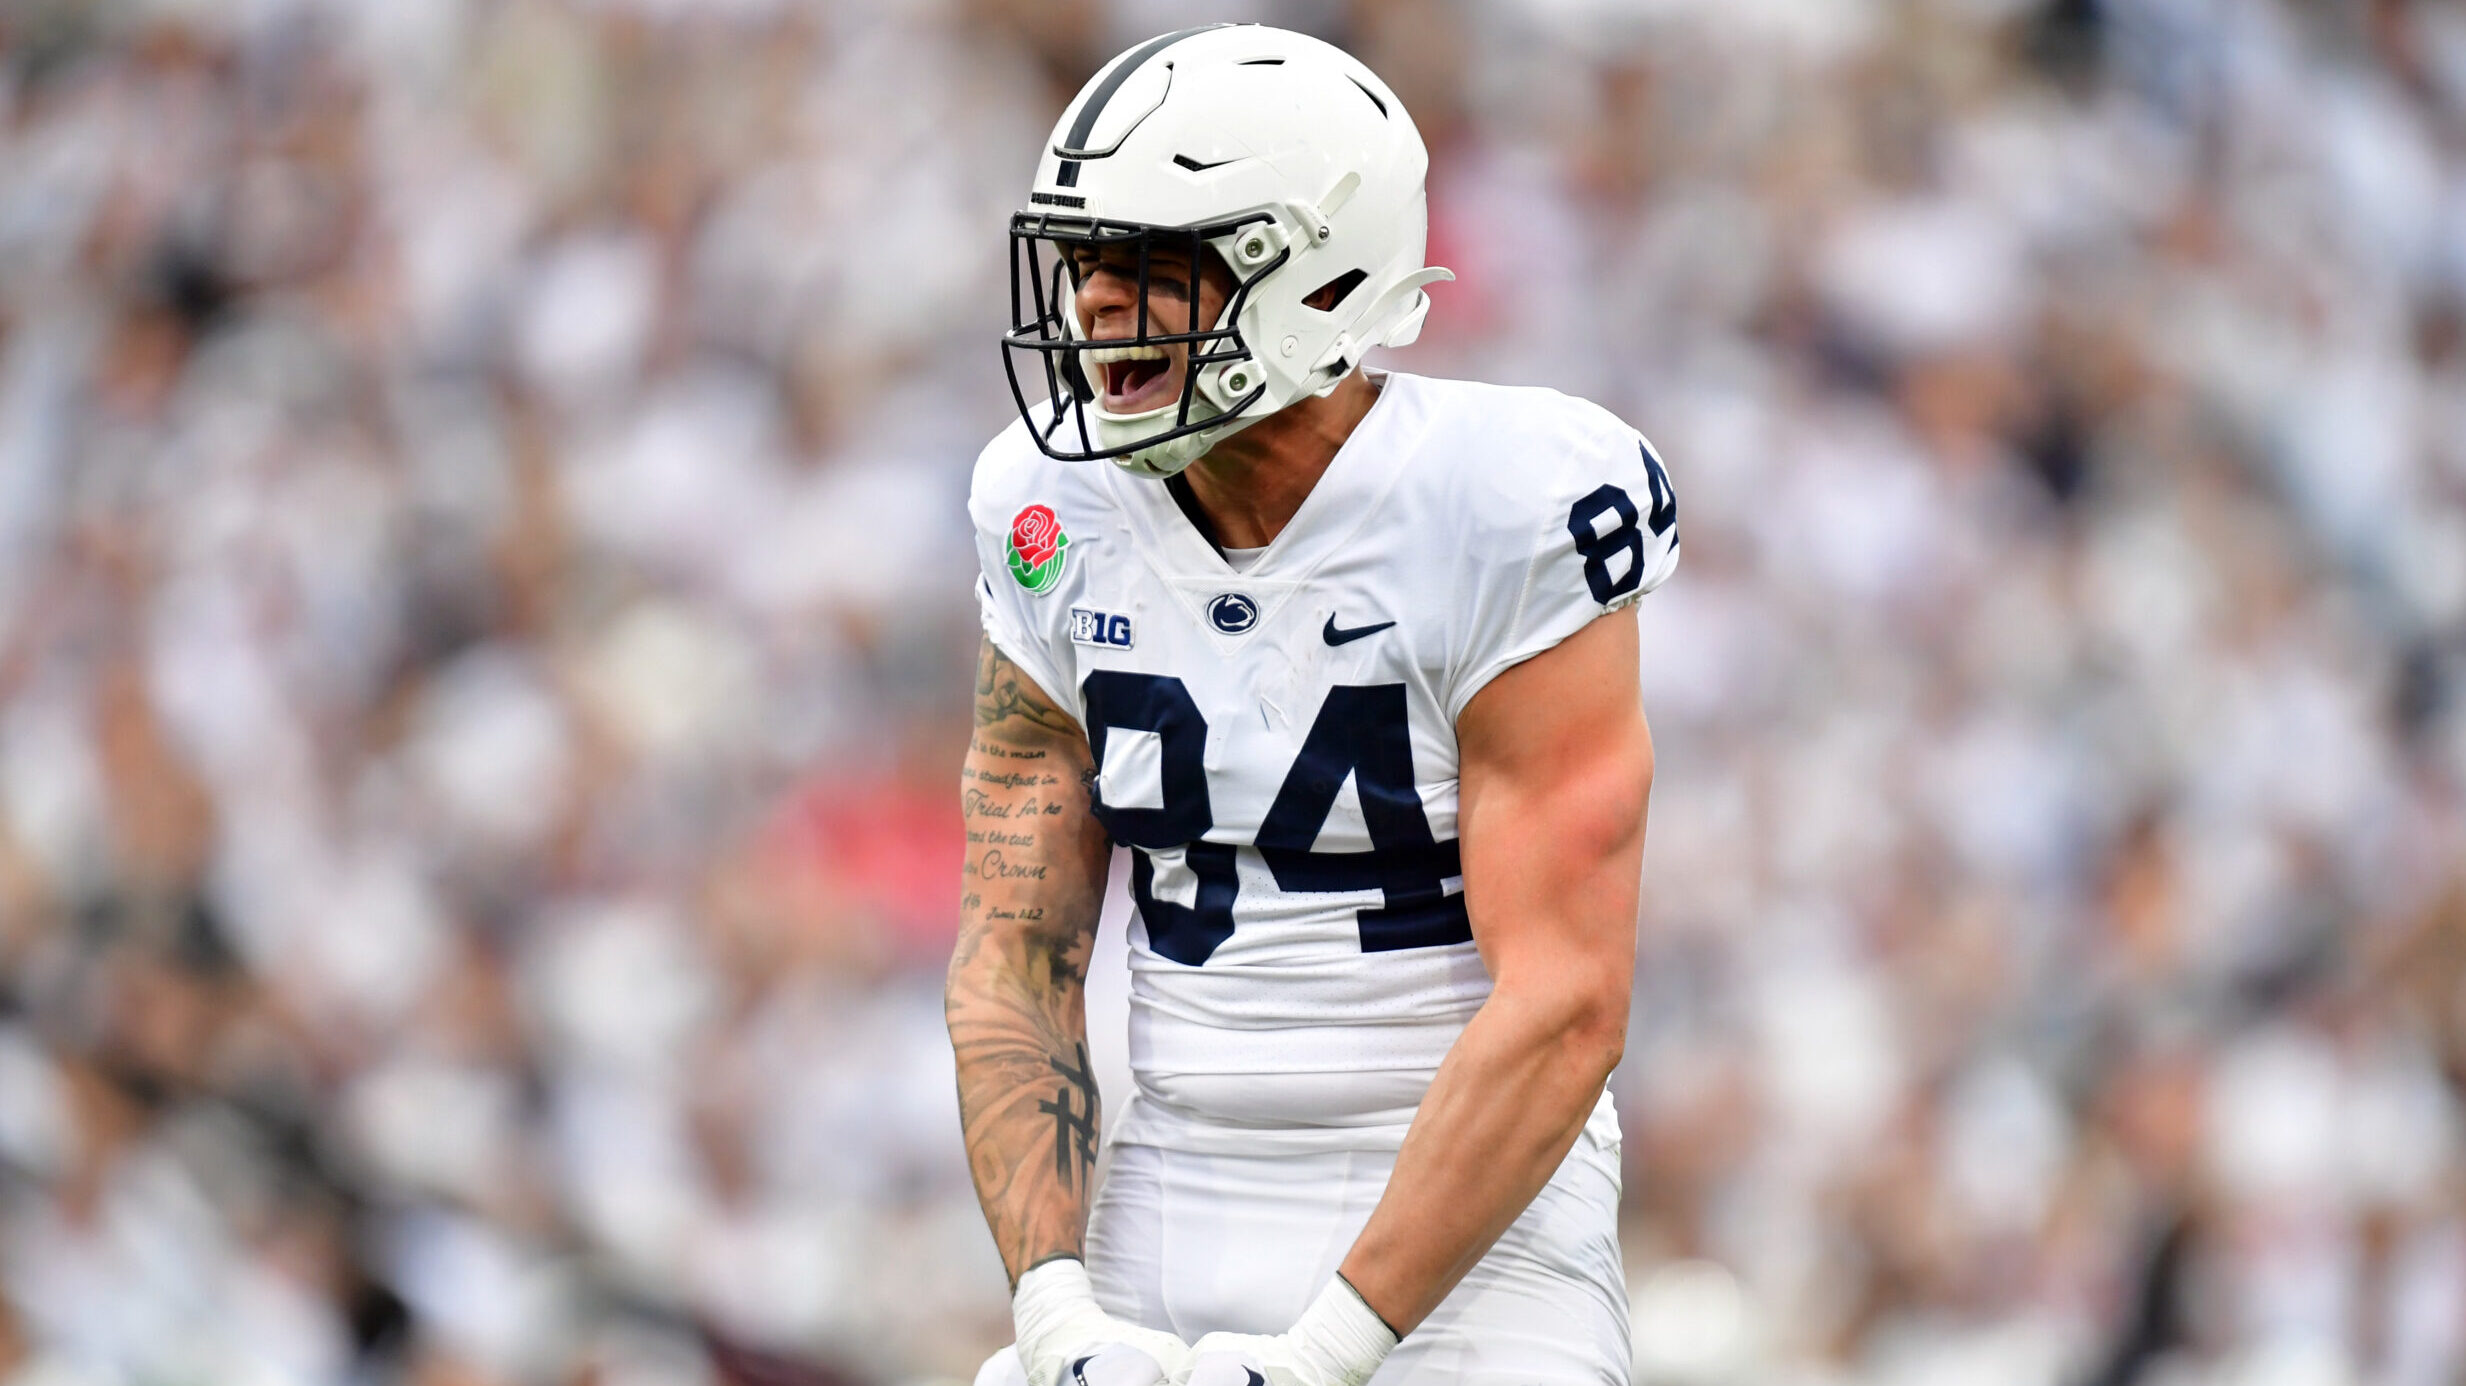 Penn State TE Theo Johnson reacts after a catch